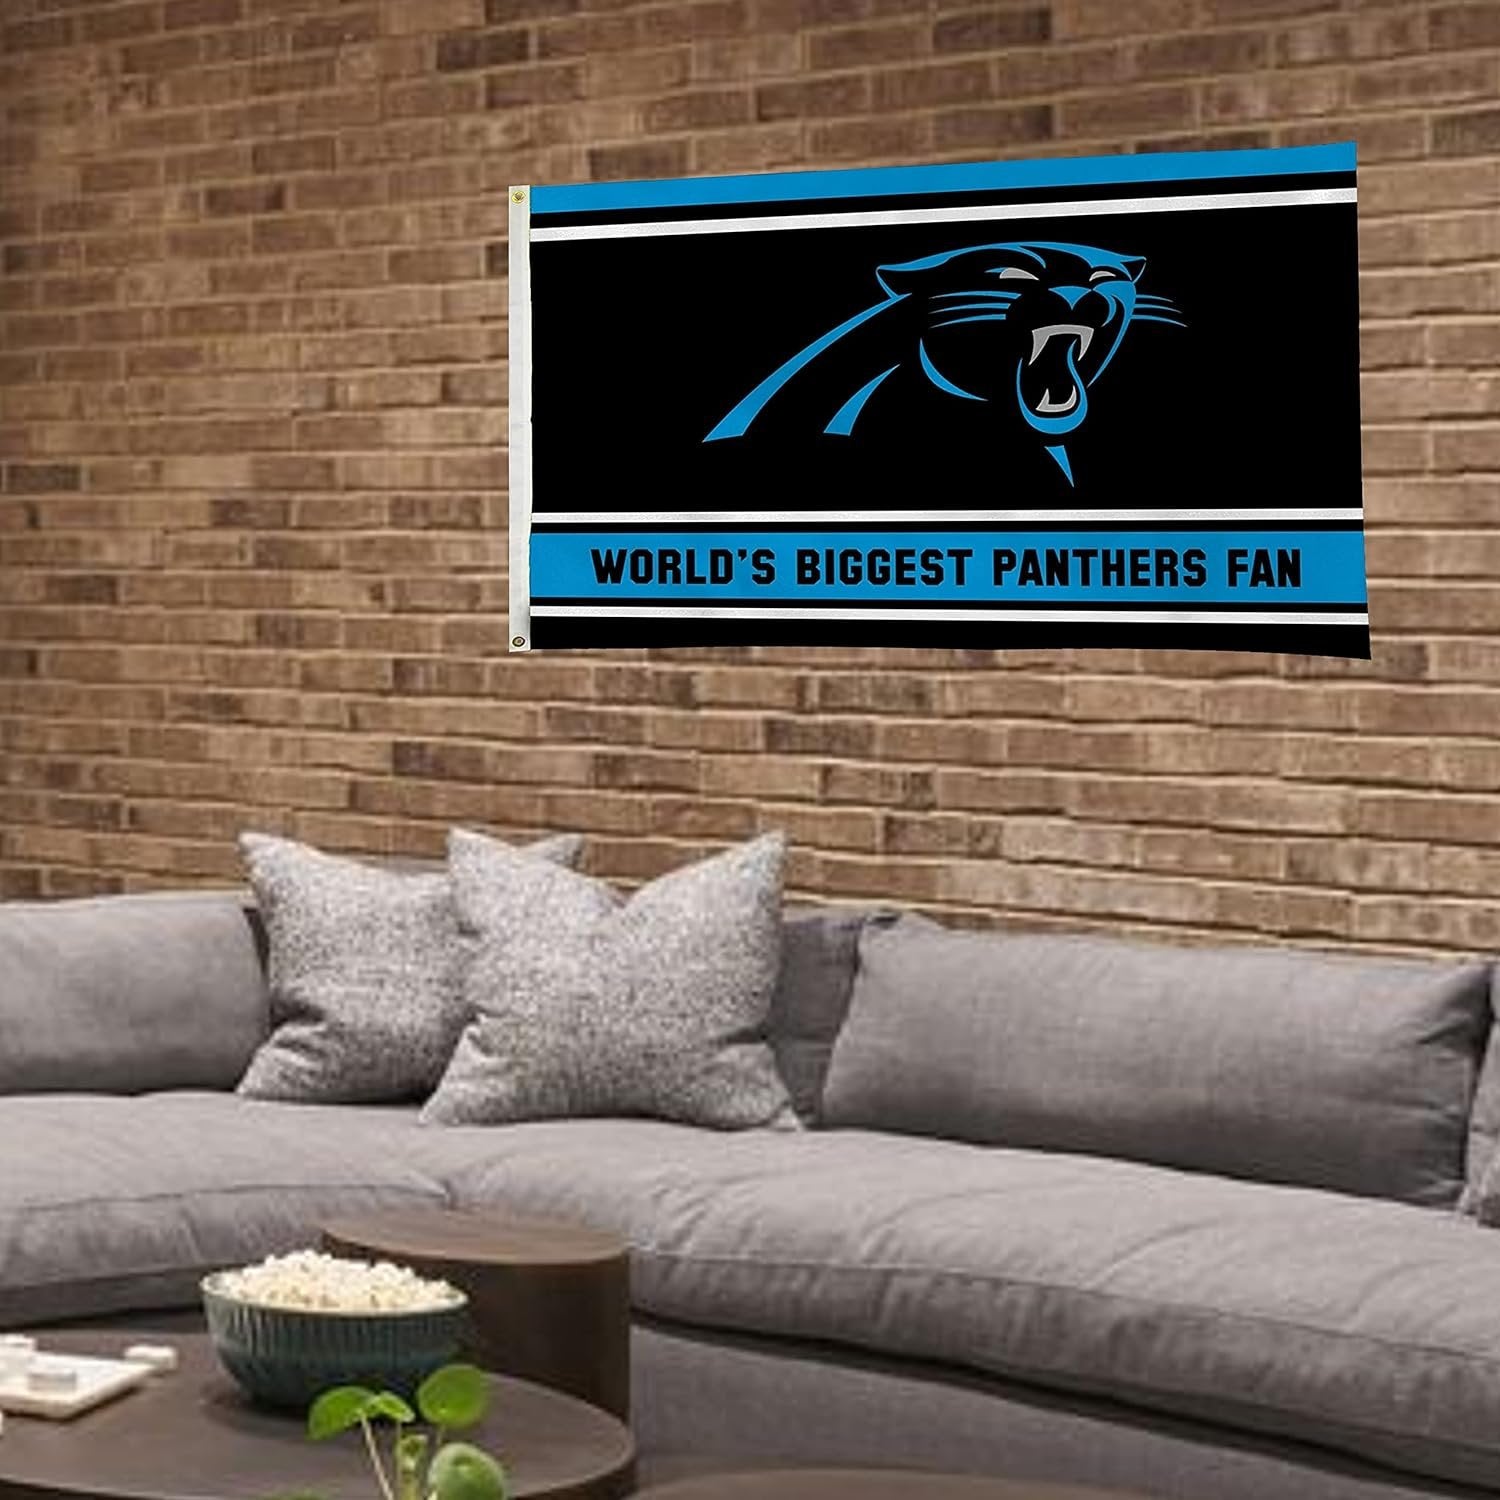 Carolina Panthers 3x5 Feet Flag Banner, World's Biggest Fan, Metal Grommets, Single Sided, Indoor or Outdoor Use